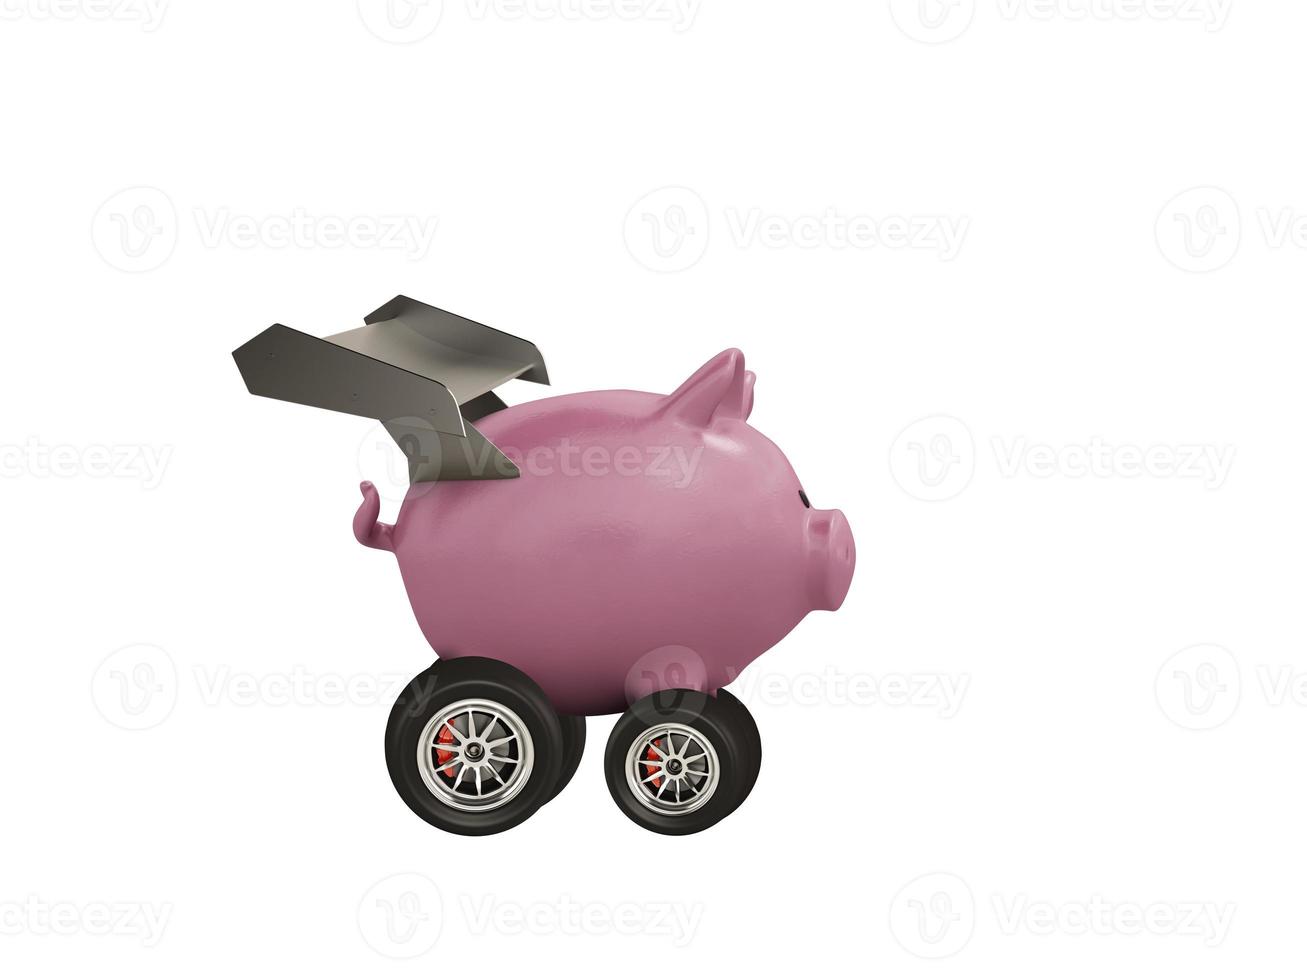 Piggy bank with wheel like a car. Concept of fast increse of money. Isolated on white background photo